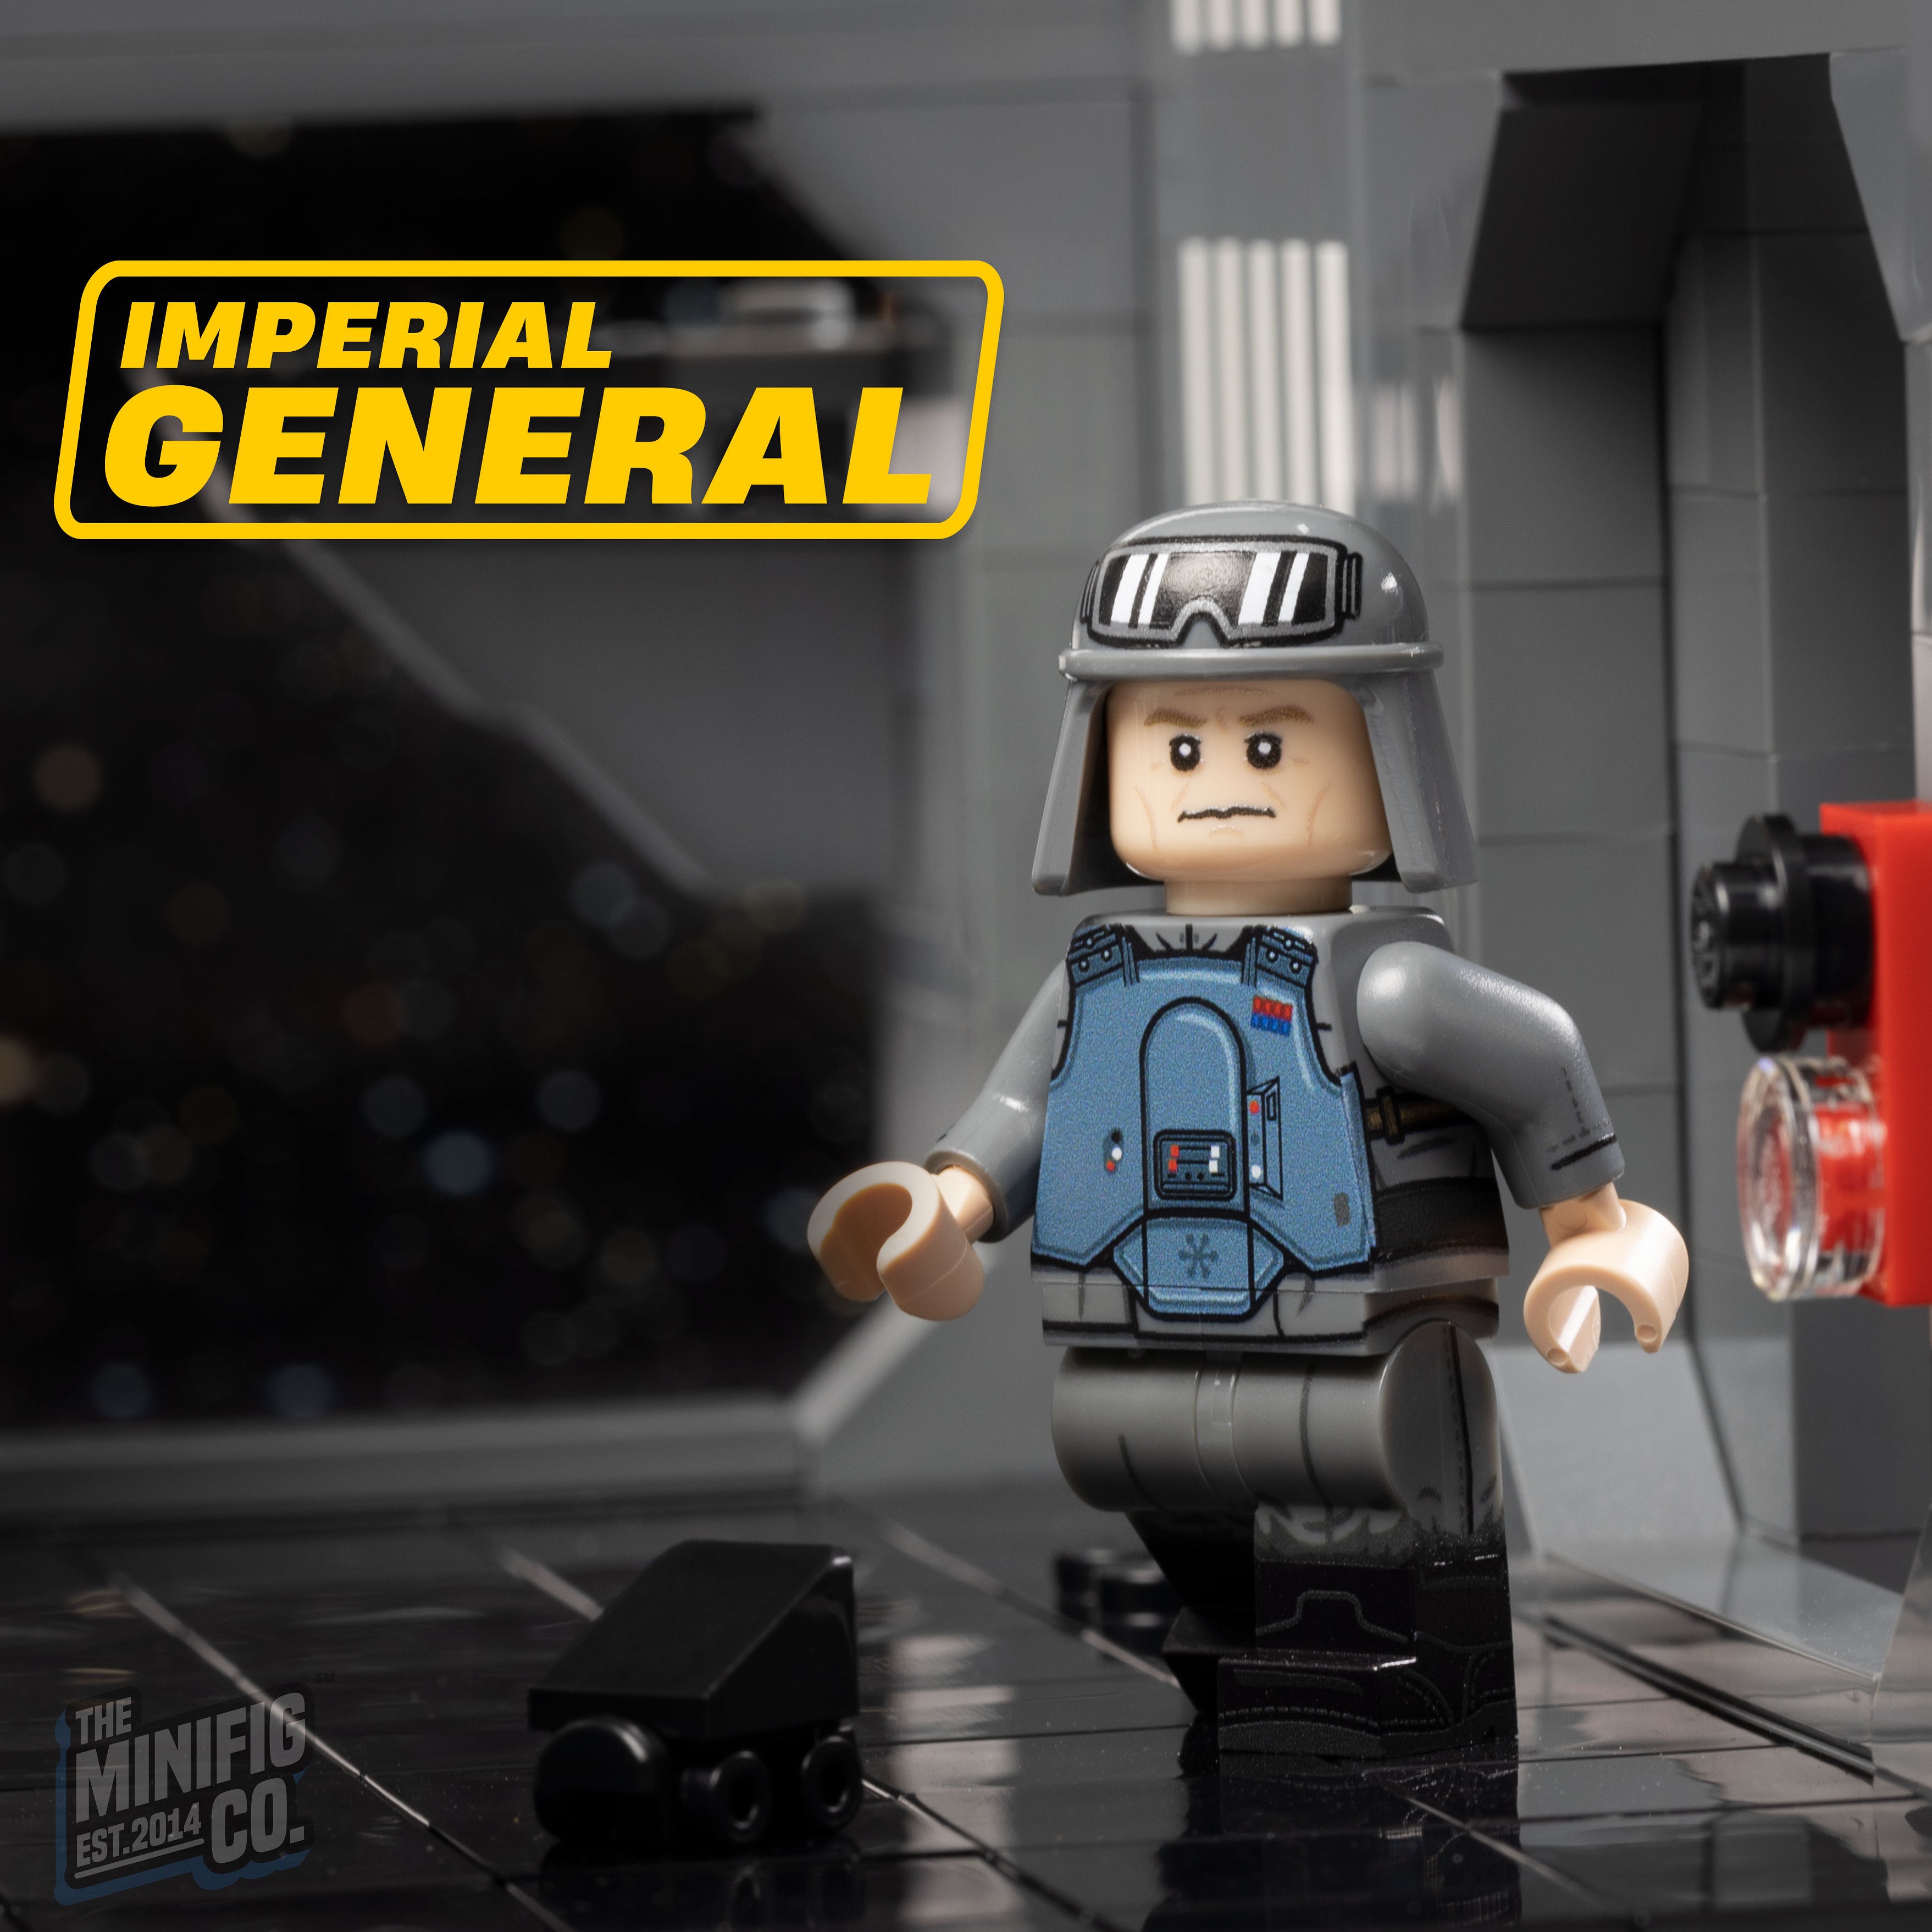 Imperial General V - The Minifig Co.